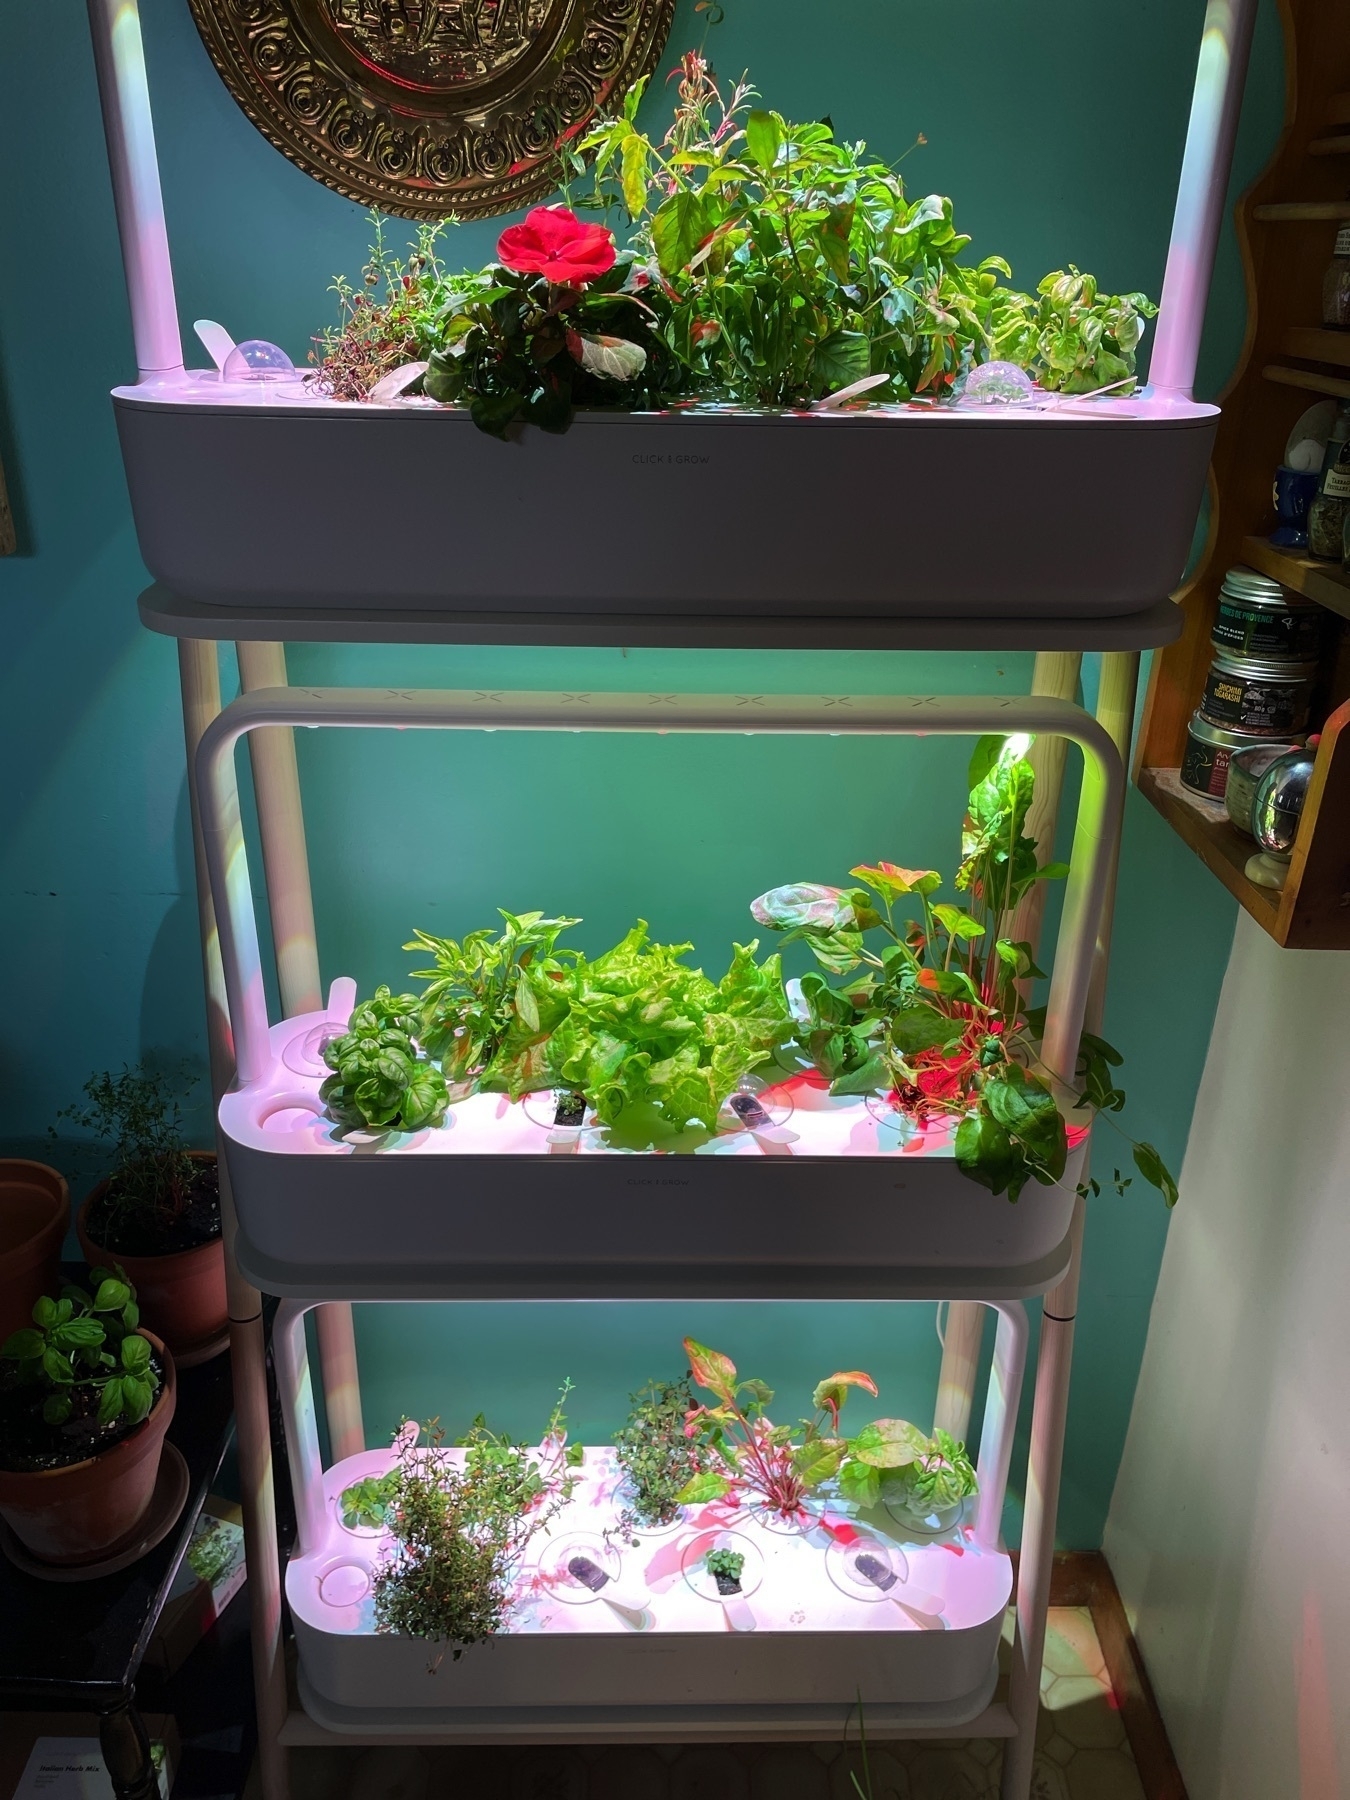 Three Click and Grow hydroponic plant systems with plants growing out of it with lights on.